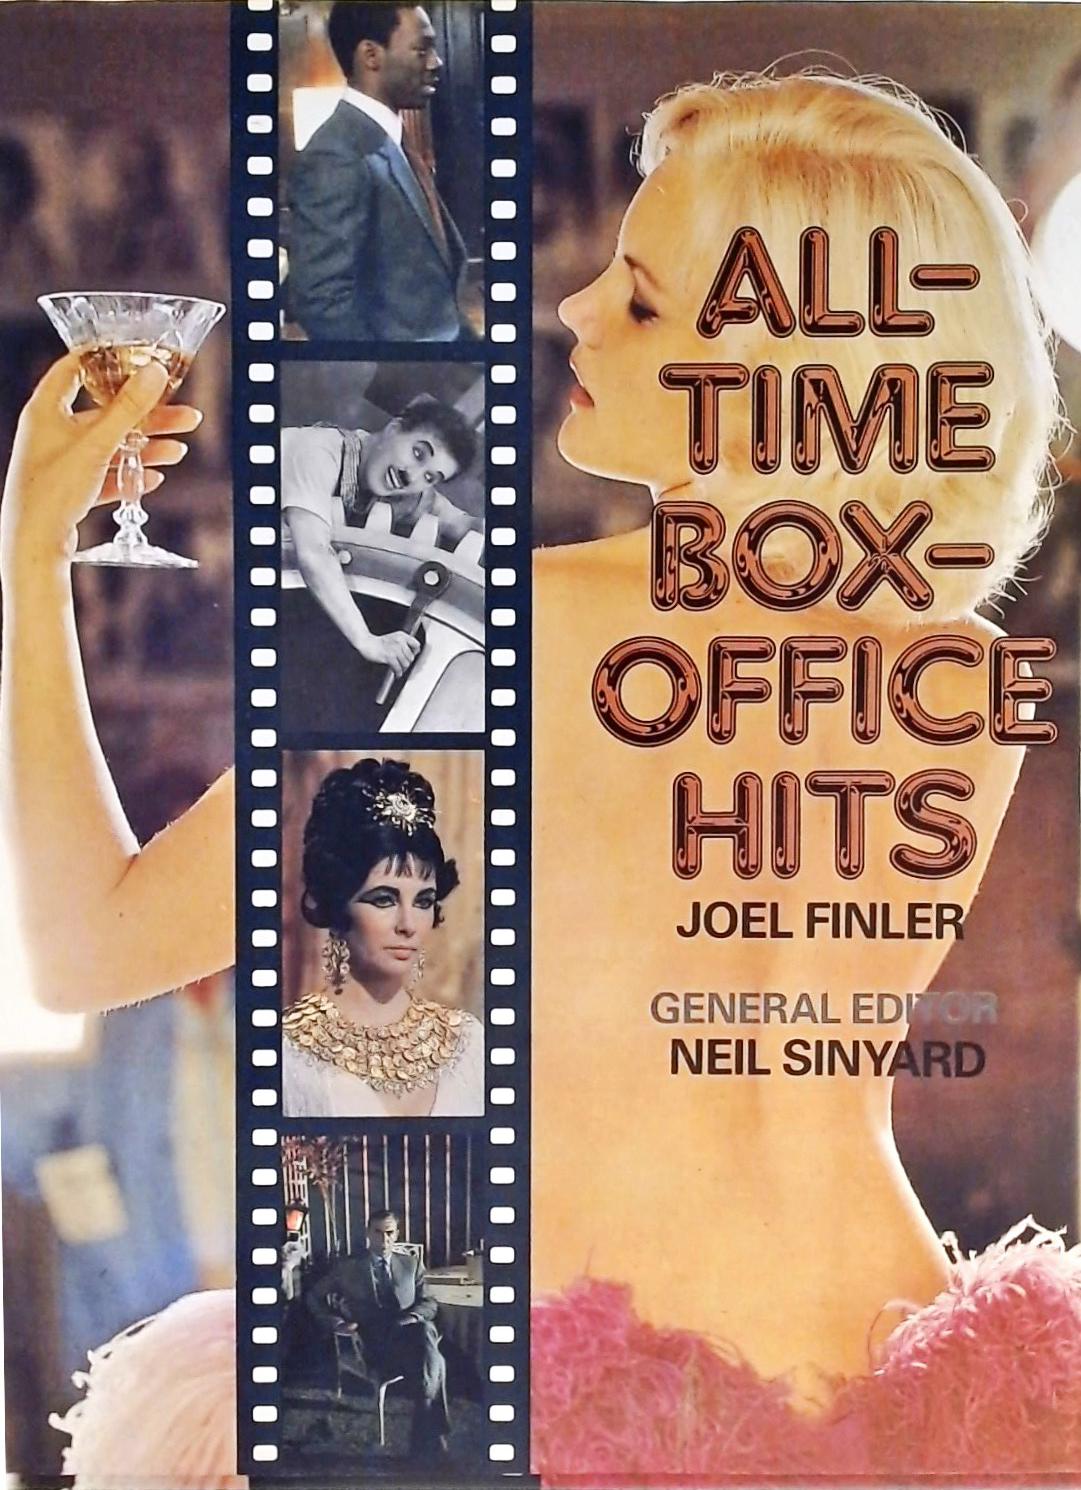 All-Time Box-Office Hits